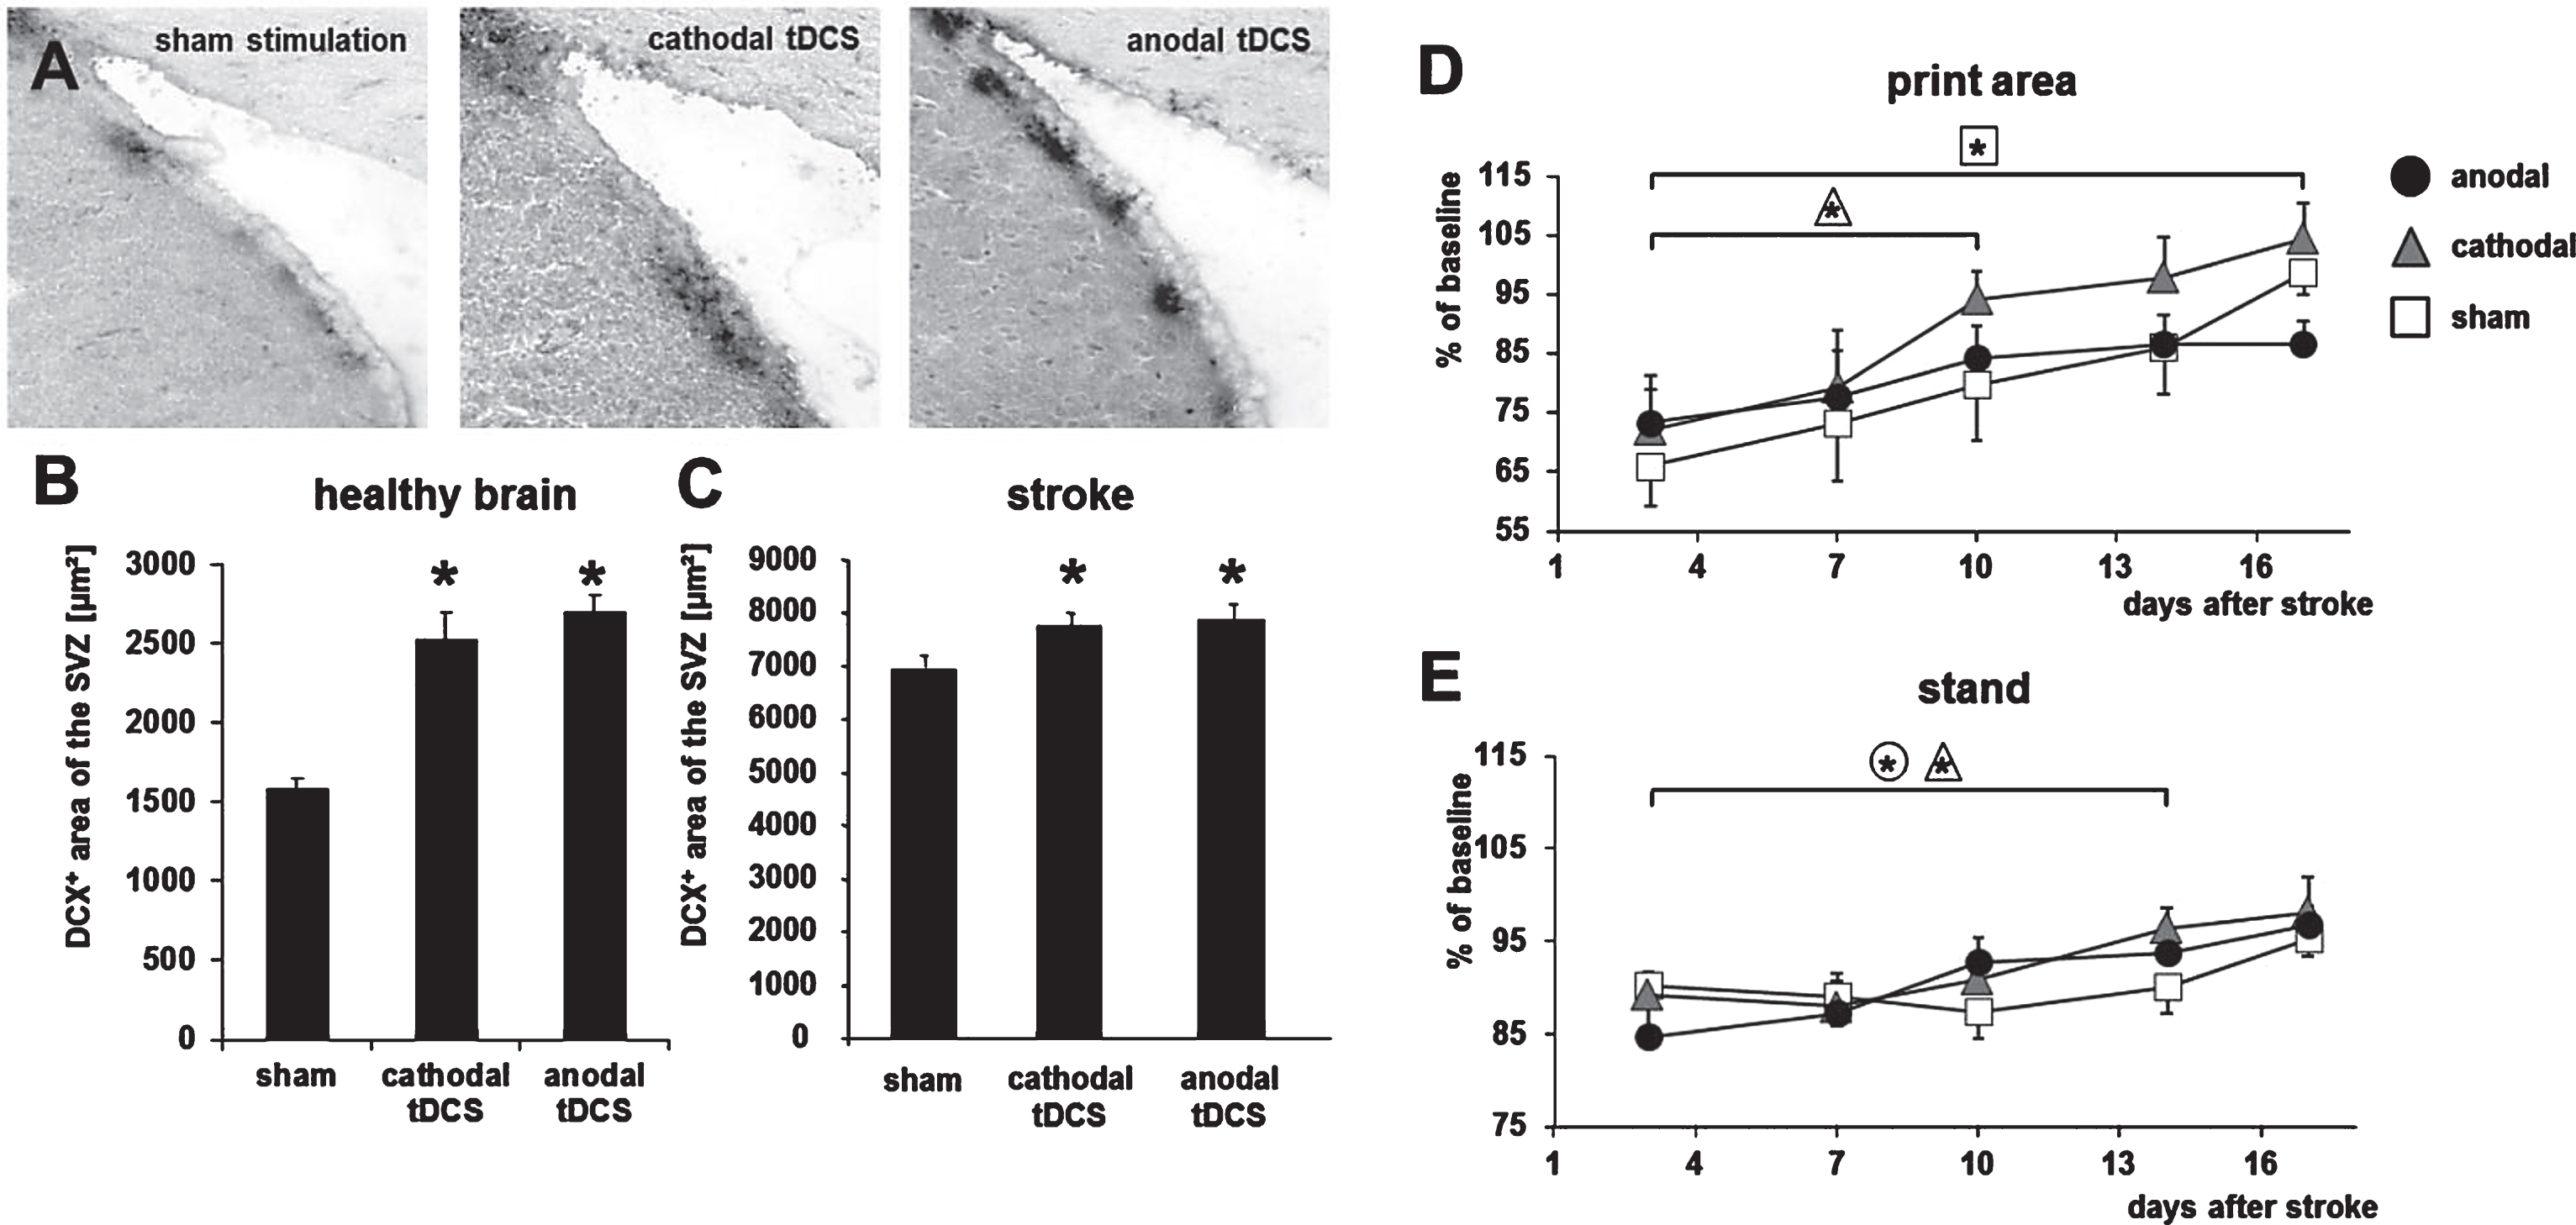 Transcranial direct current stimulation (tDCS) induces neurogenesis and accelerates functional recovery after stroke in the rodent brain. (A) Neuroblasts in the subventricular zone (SVZ) were identified by their expression of doublecortin (DCX) under control conditions (sham, left) and after multi-session tDCS of cathodal (middle) or anodal (right) polarity. (B) Following multi-session tDCS of cathodal or anodal polarity, the area of DCX-positive neuroblasts in the SVZ ipsilateral to tDCS was wider than under control conditions in the healthy mouse brain (sham). (C) Rats subjected to focal cerebral ischemia by middle cerebral artery occlusion displayed a wider DCX+area of the SVZ when treated with tDCS of cathodal or anodal polarity for 10 consecutive days after stroke. (D) Motor recovery assessed by the Catwalk test revealed that multi-session cathodal tDCS led to a faster recovery of limb strength (‘print area’) in stroke rats compared to sham treatment. (E) Both cathodal and anodal tDCS facilitated recovery of gait, i.e., led to less limping (‘stand’), compared to control (*p < 0.05). Figure elements were modified from Pikhovych et al., 2016 and Braun et al., 2016 with permissions.